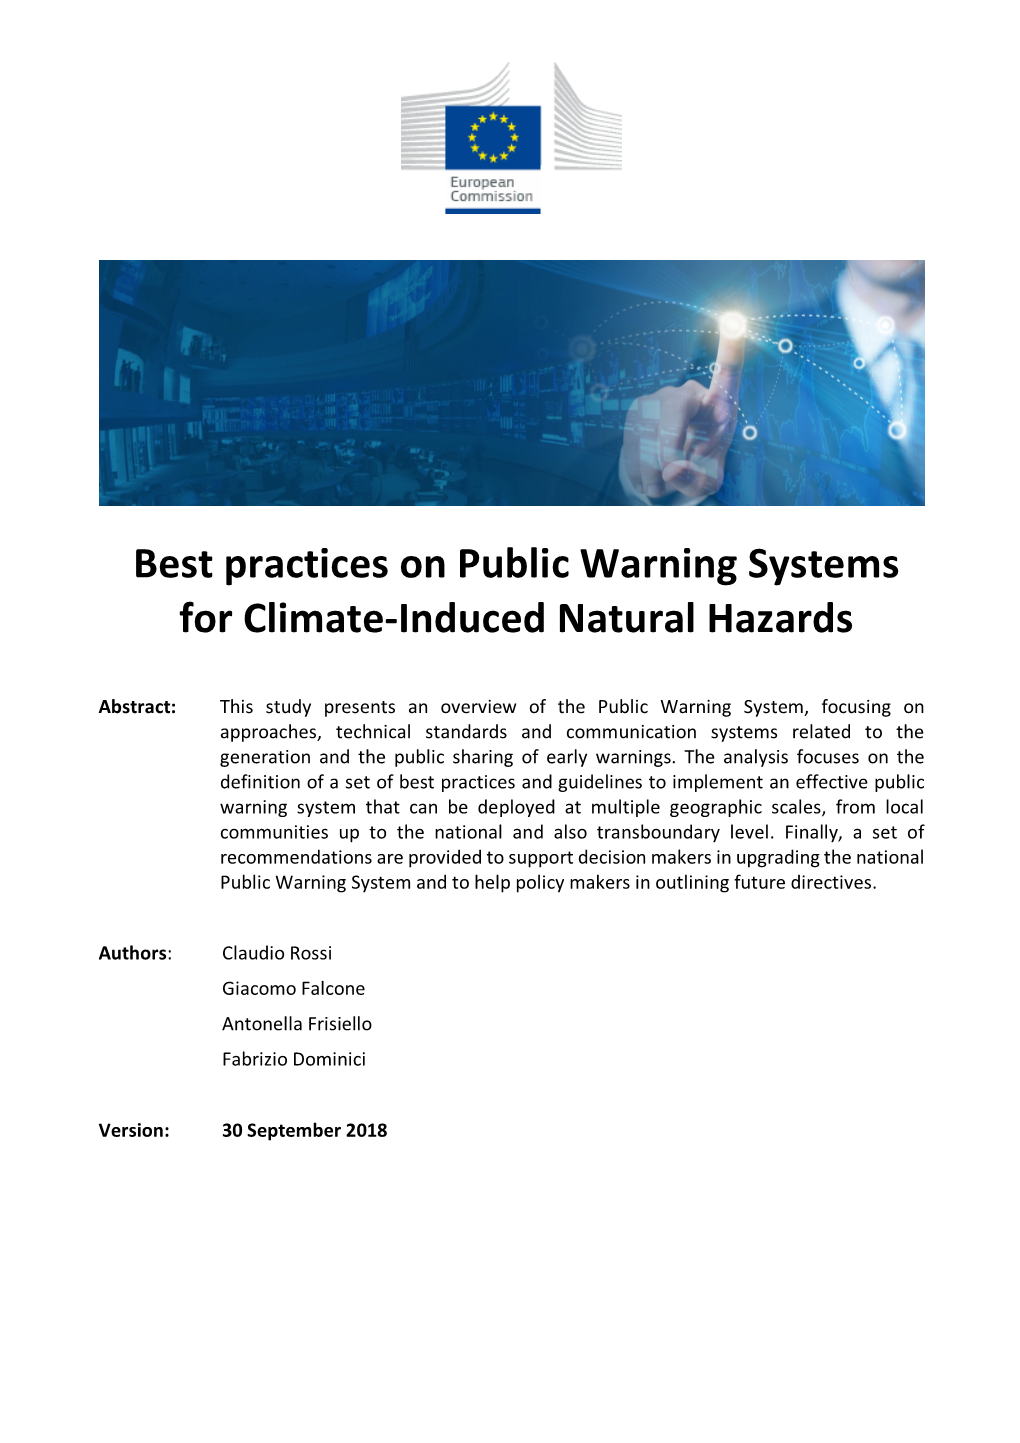 Best Practices on Public Warning Systems for Climate-Induced